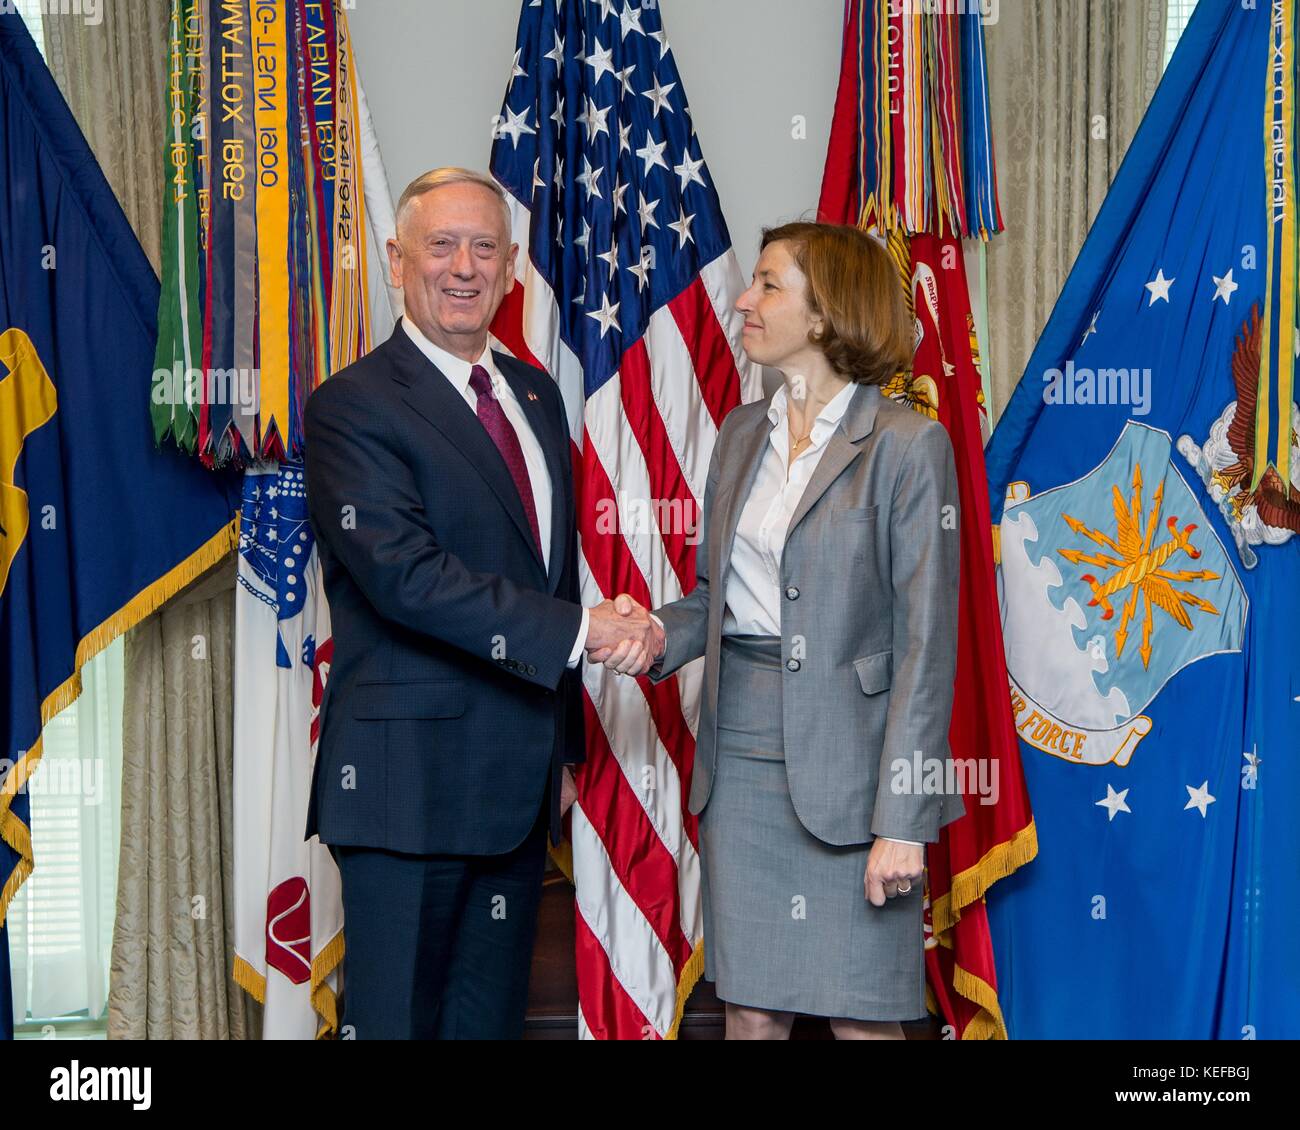 U.S. Secretary of Defense Jim Mattis welcomes French Defense Minister Florence Parly, right, prior to bilateral discussions the at the Pentagon October 20, 2017 in Arlington, Virginia. Stock Photo